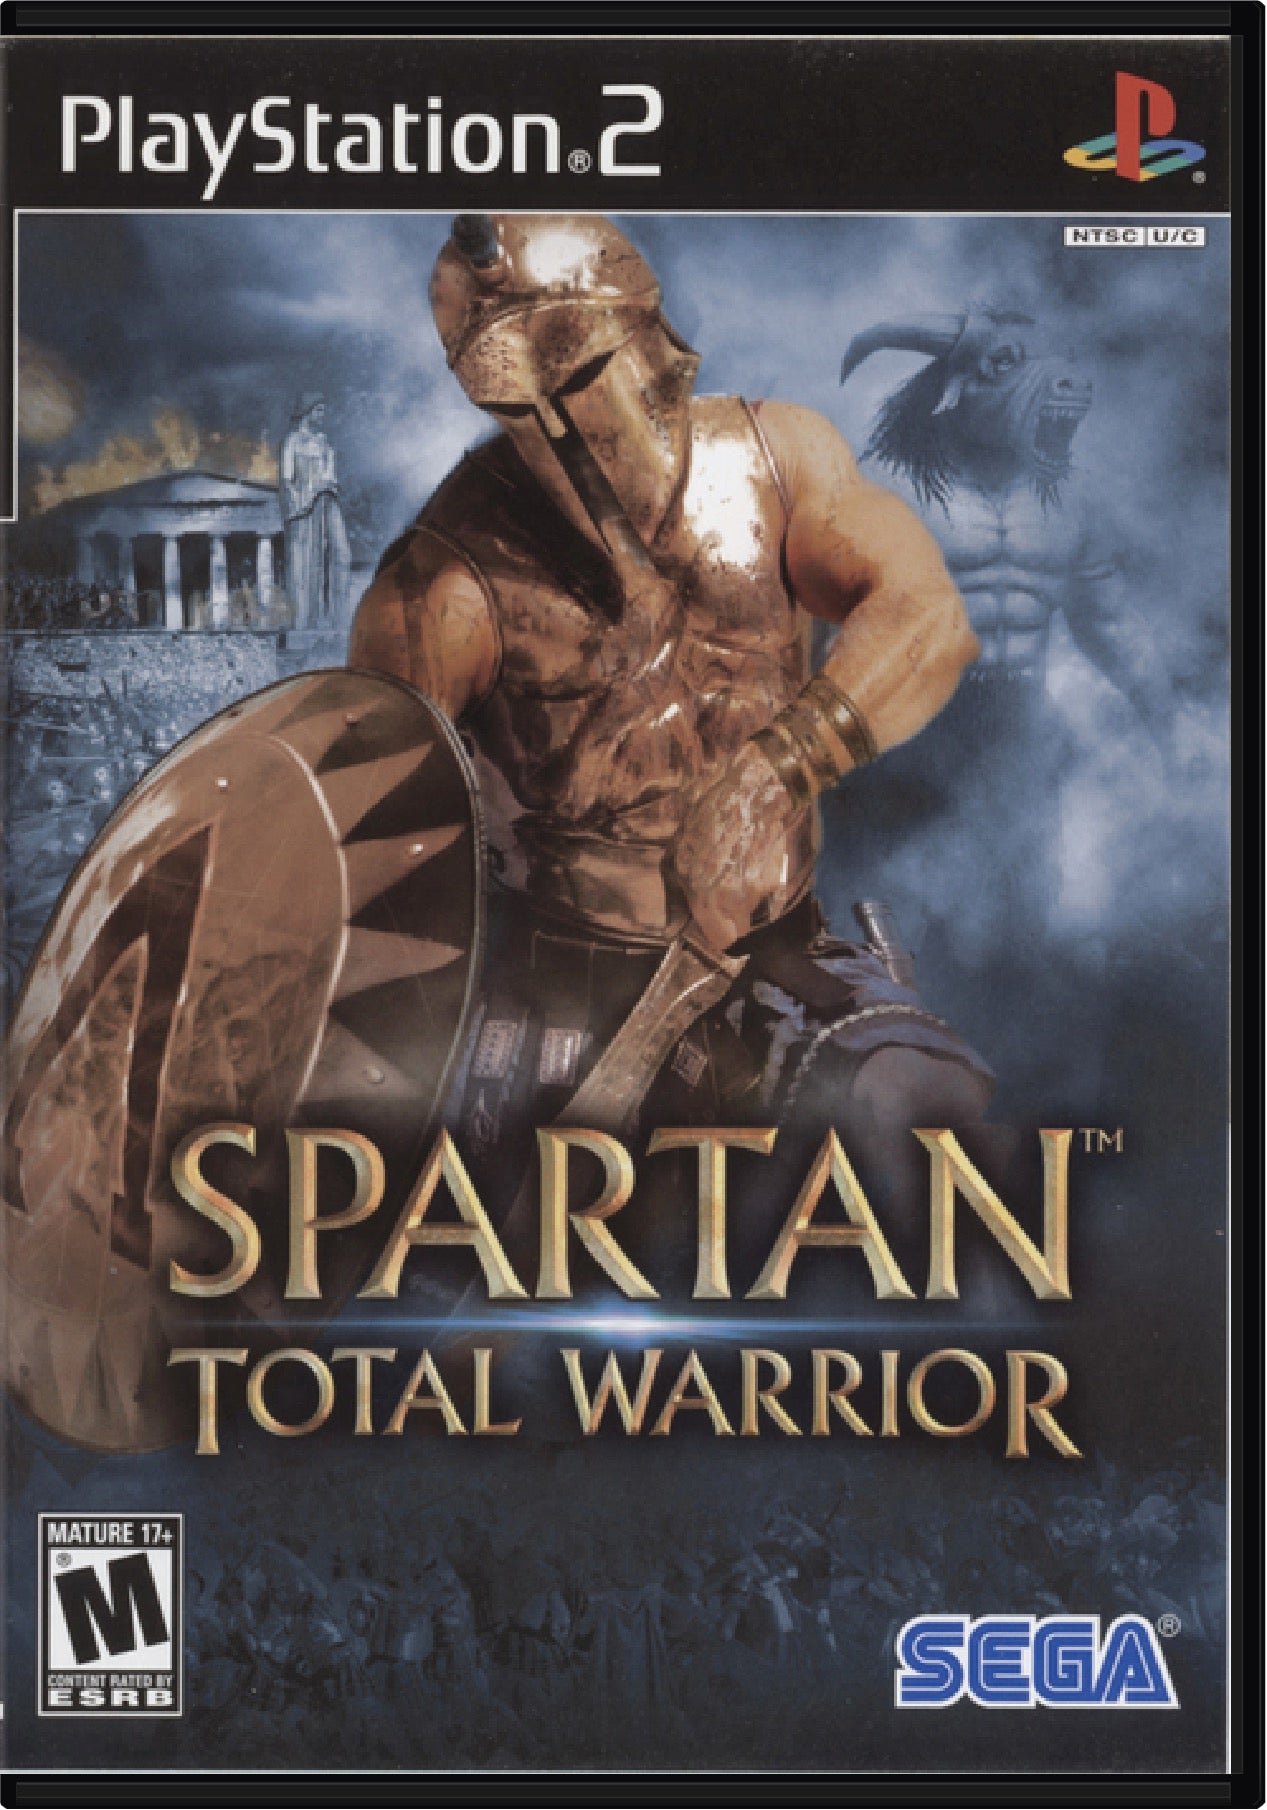 Spartan Total Warrior Cover Art and Product Photo